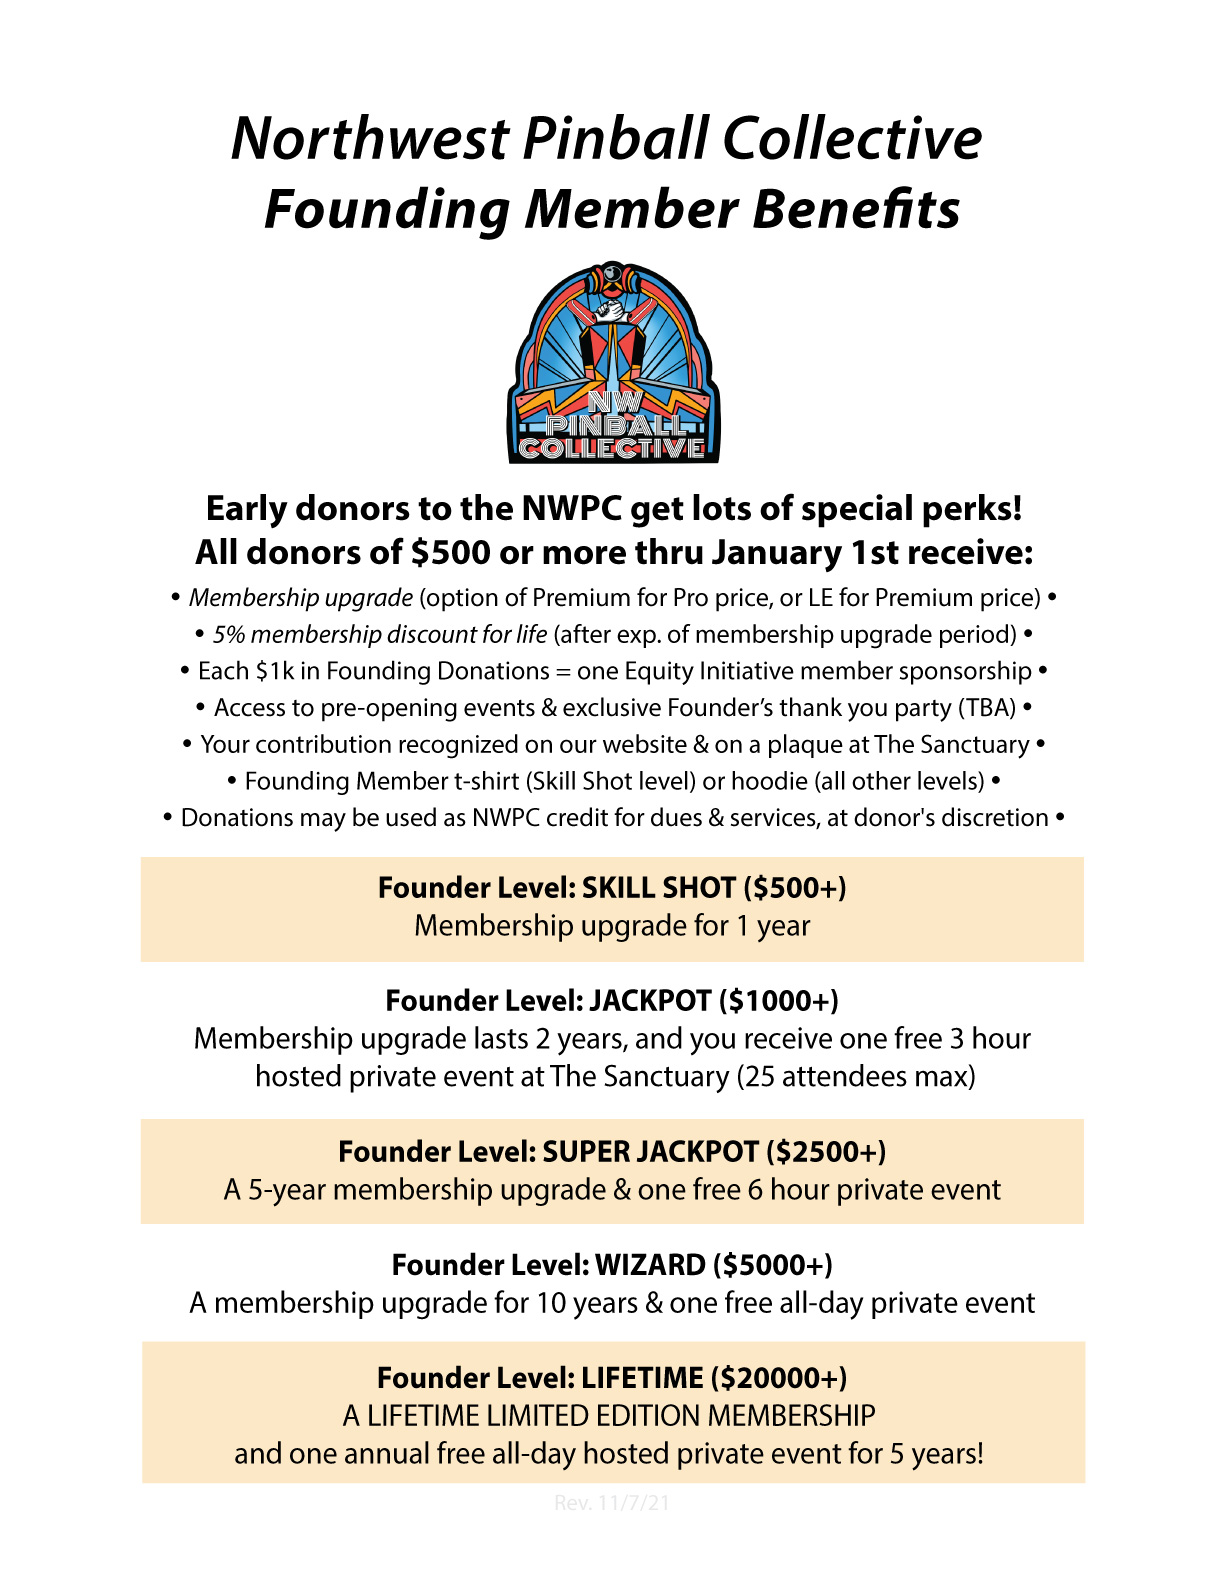 List of NWPC Founding Member Benefits